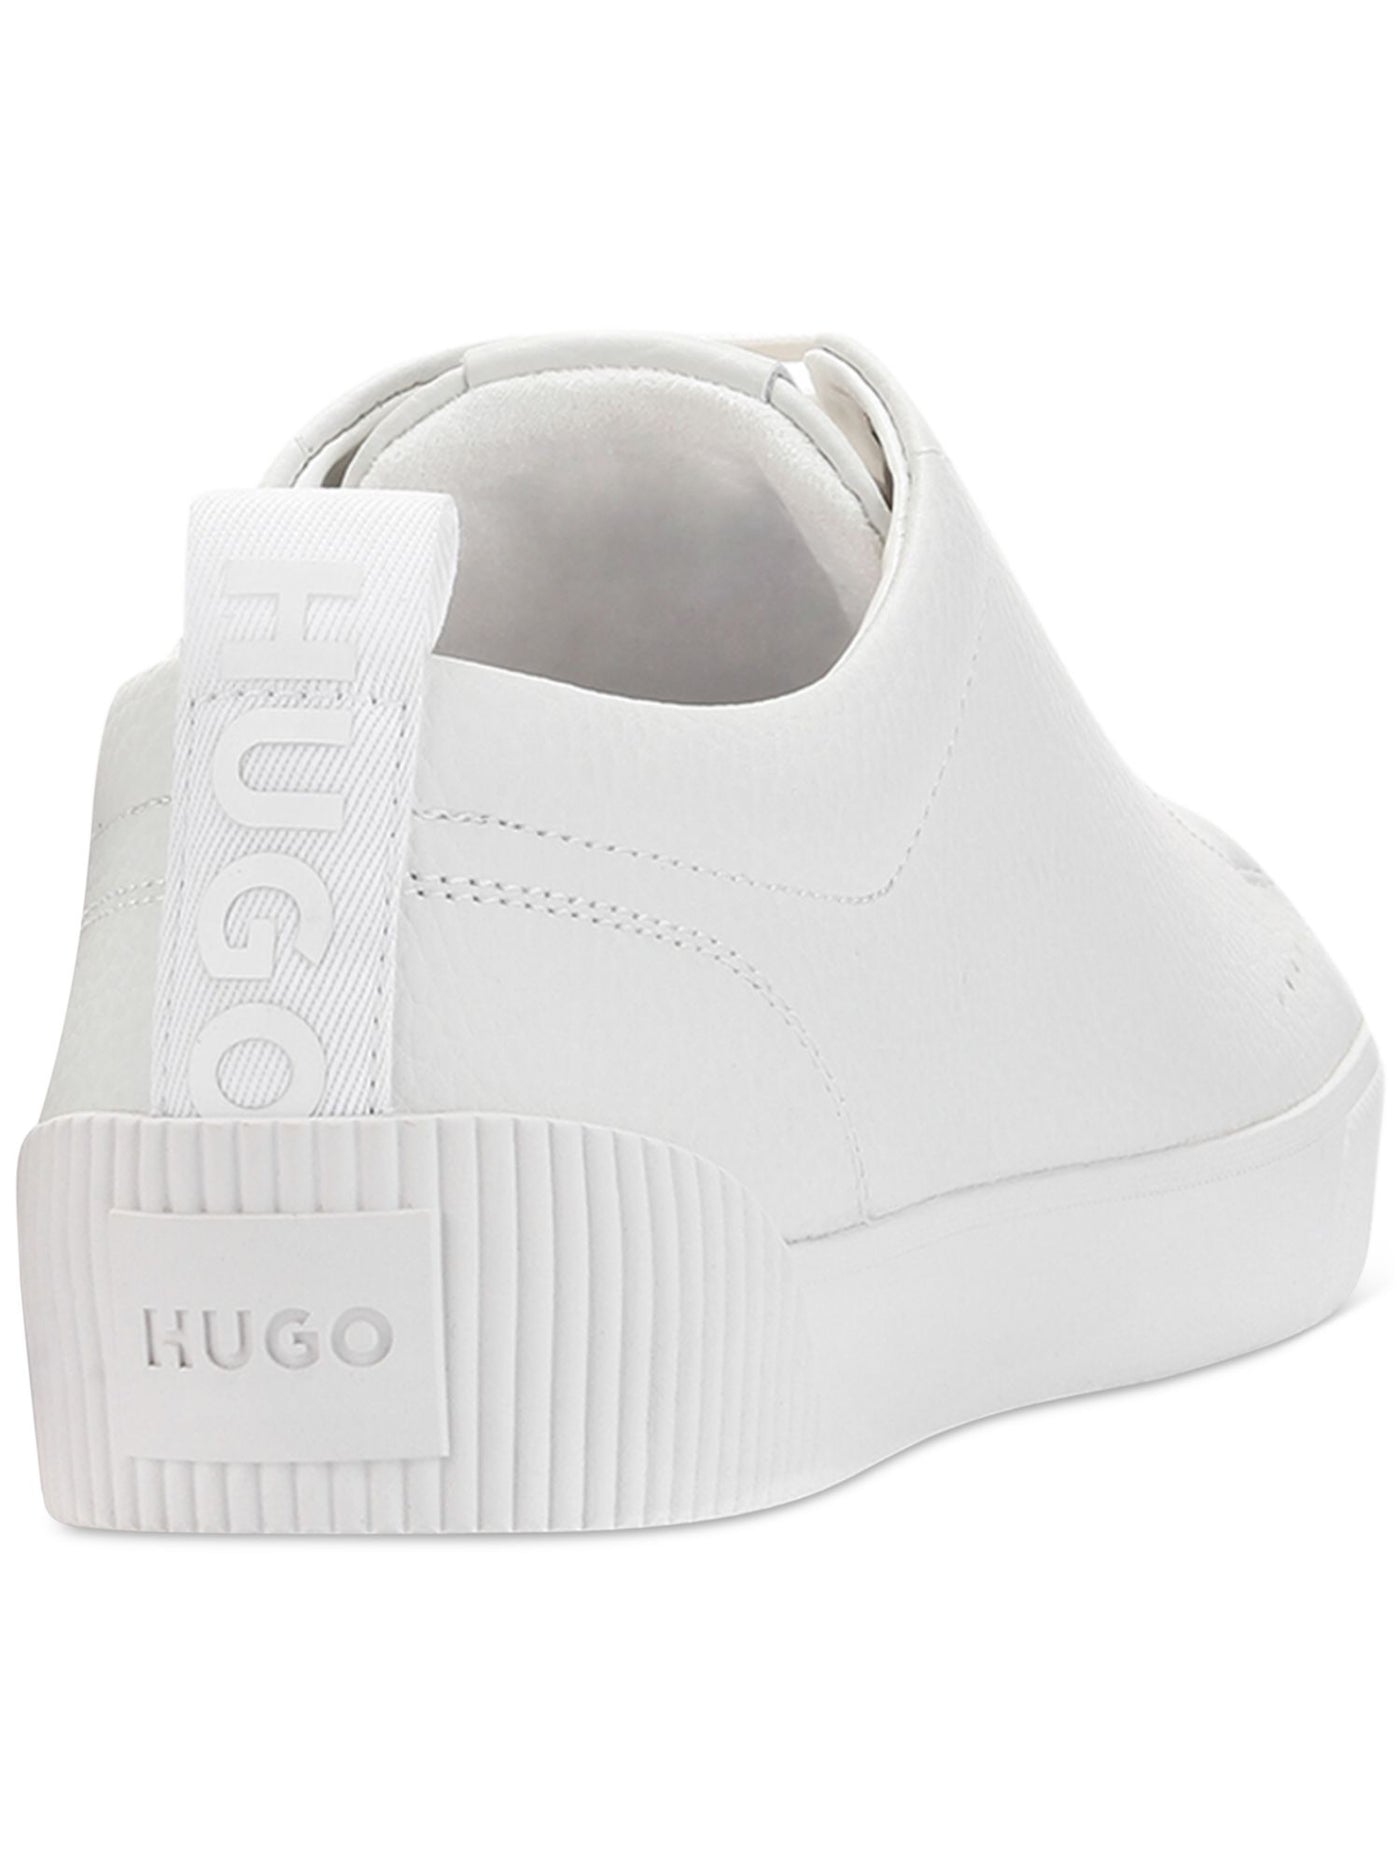 HUGO BOSS Mens White Odor Control Moisture Control Heel Pull-Tab Perforated Cushioned Hugo Boss Round Toe Lace-Up Sneakers Shoes 42